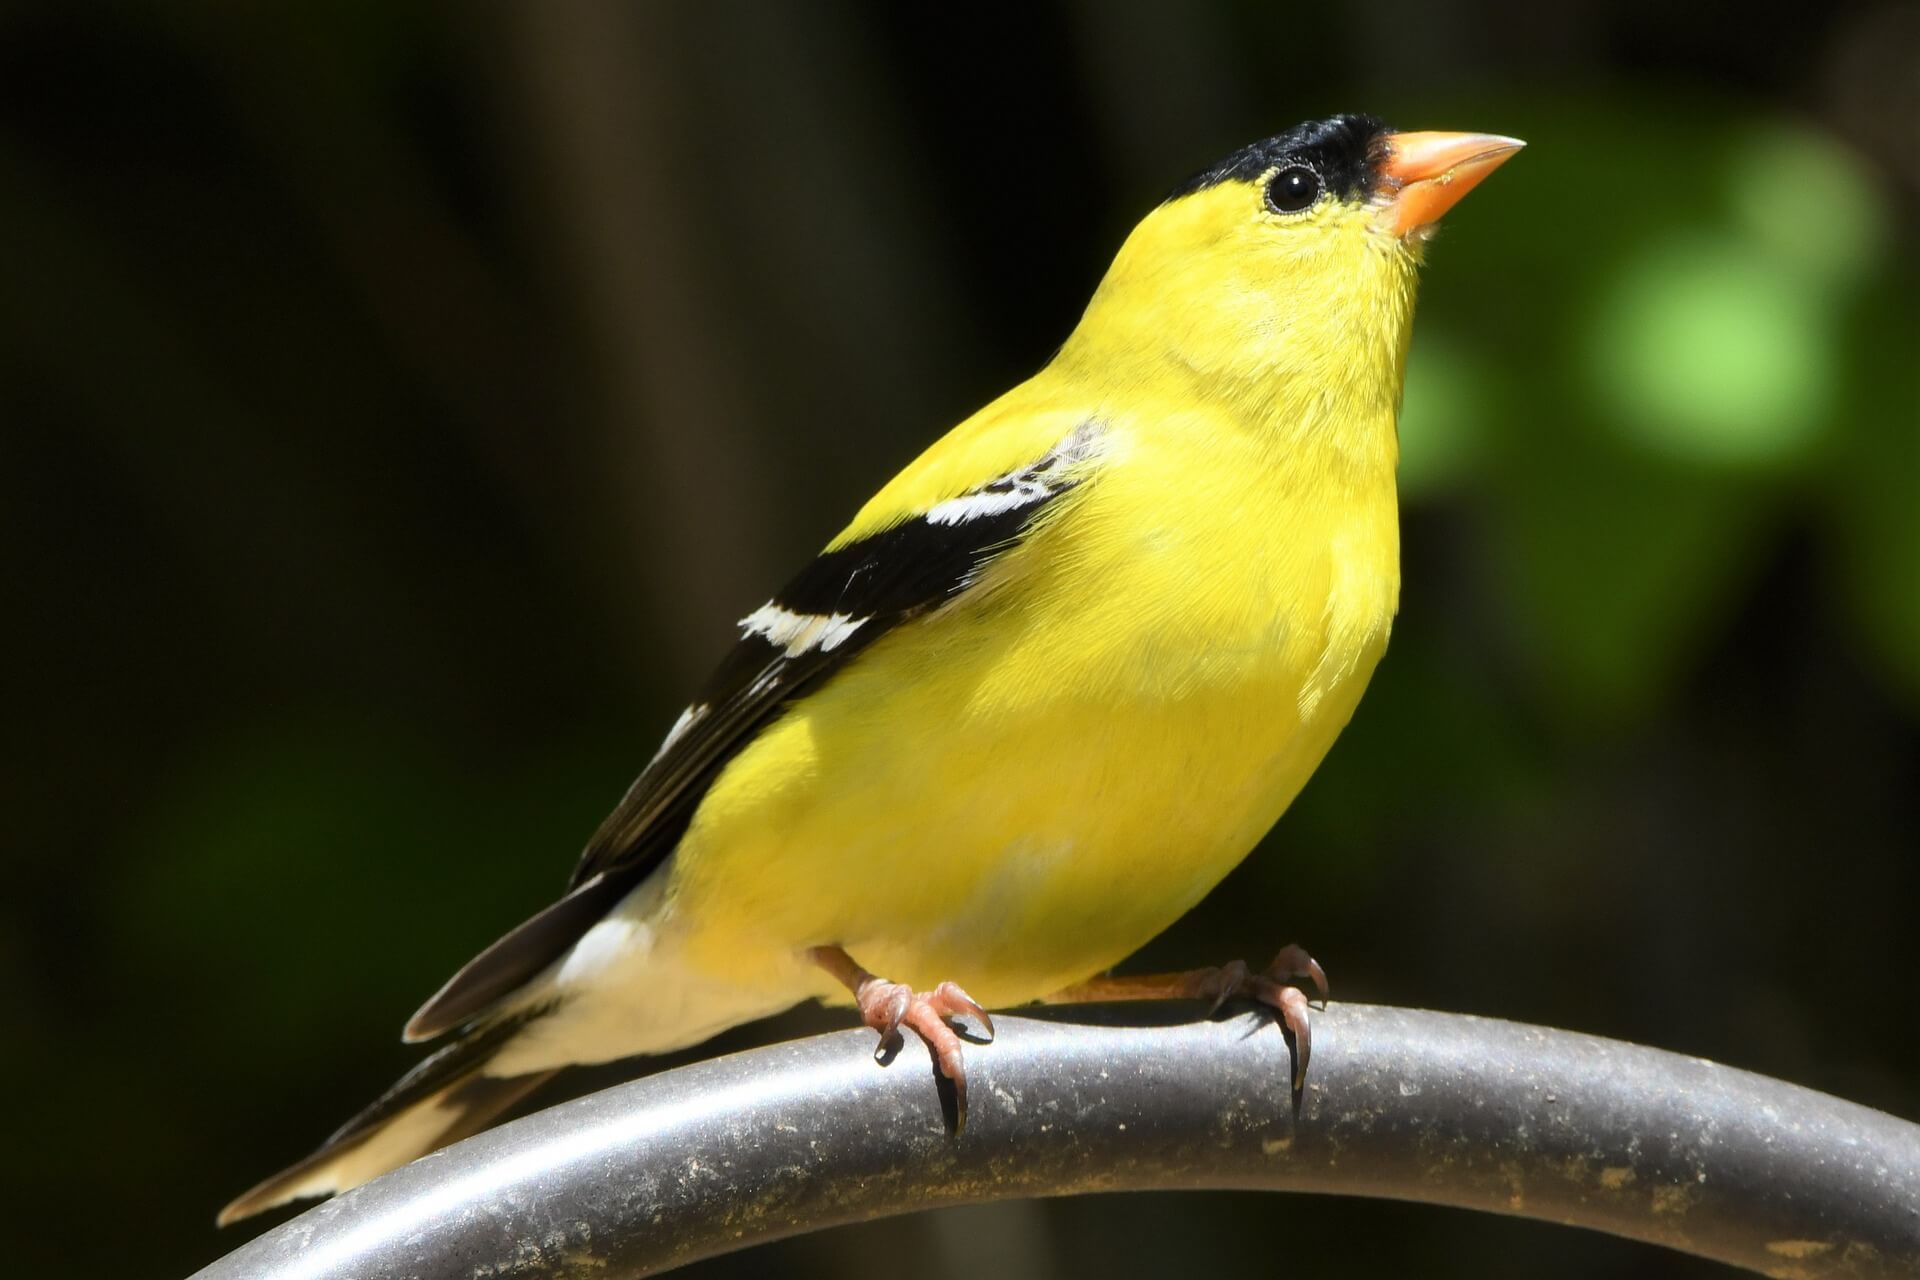 Our Backyard Birds: the American Goldfinch